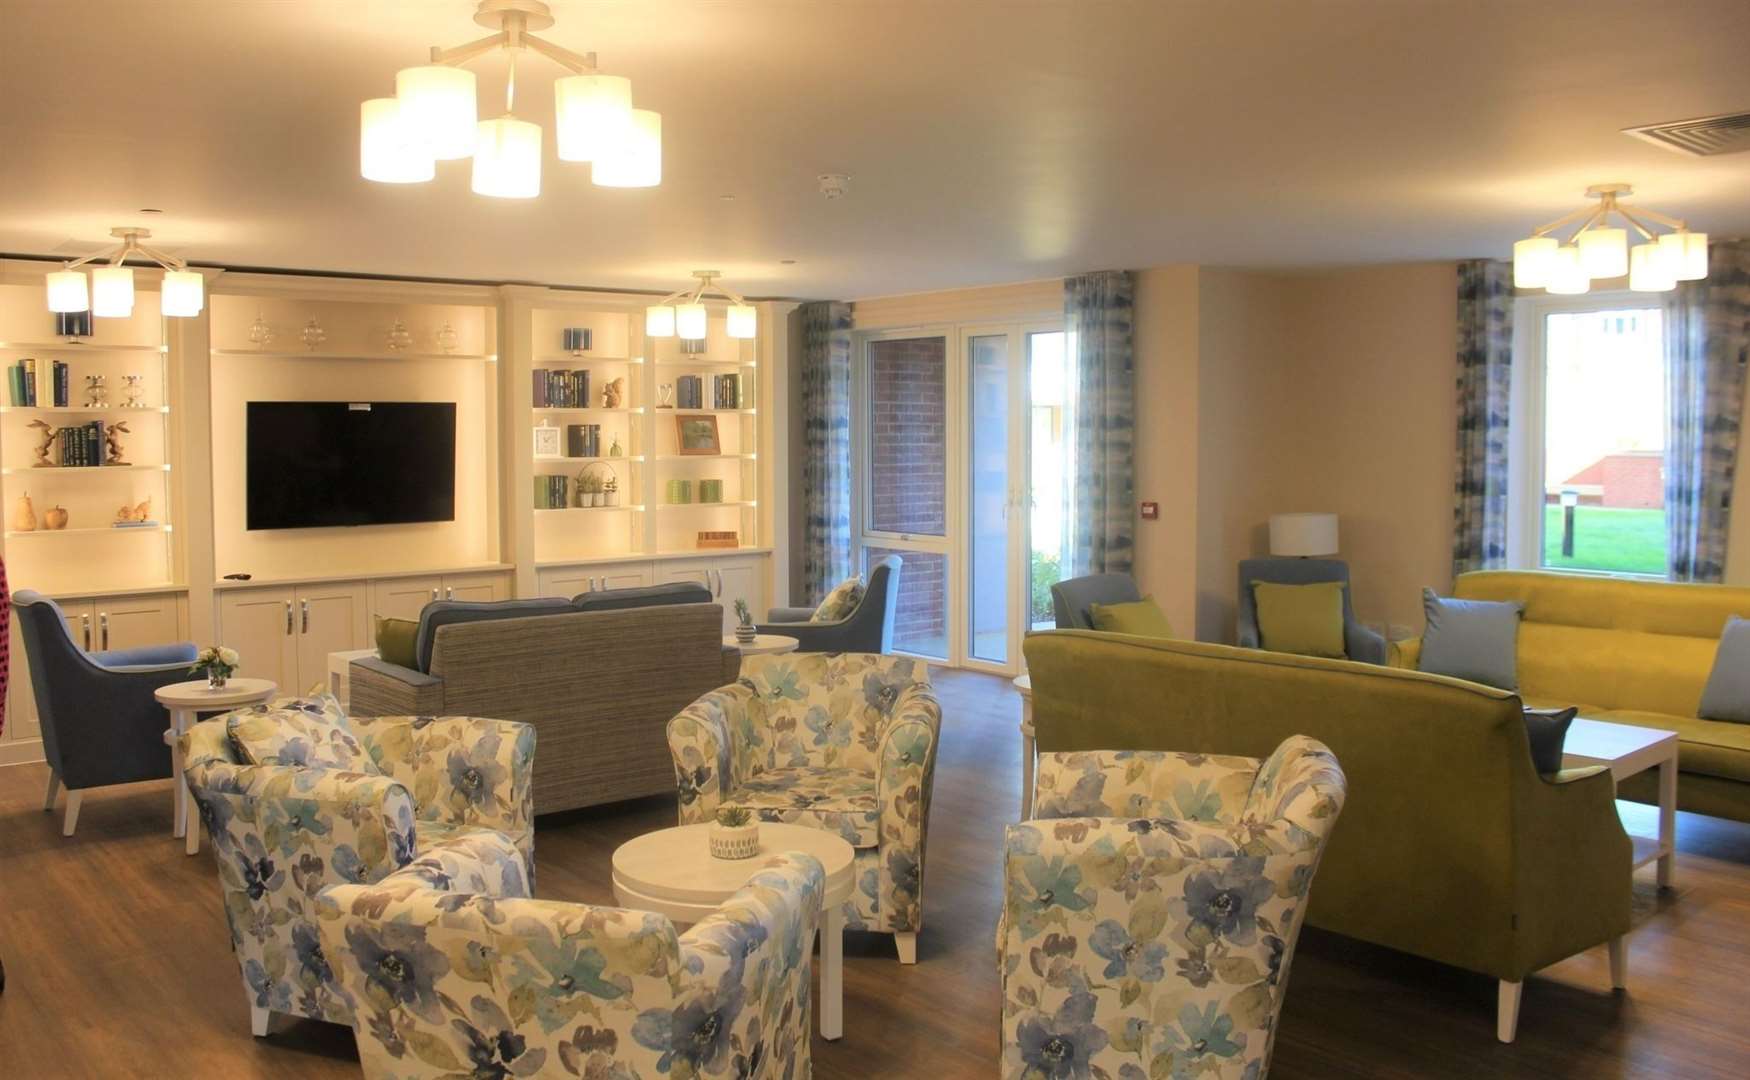 East Stour Court has 29 homes for older people that are care ready. Picture: ABC